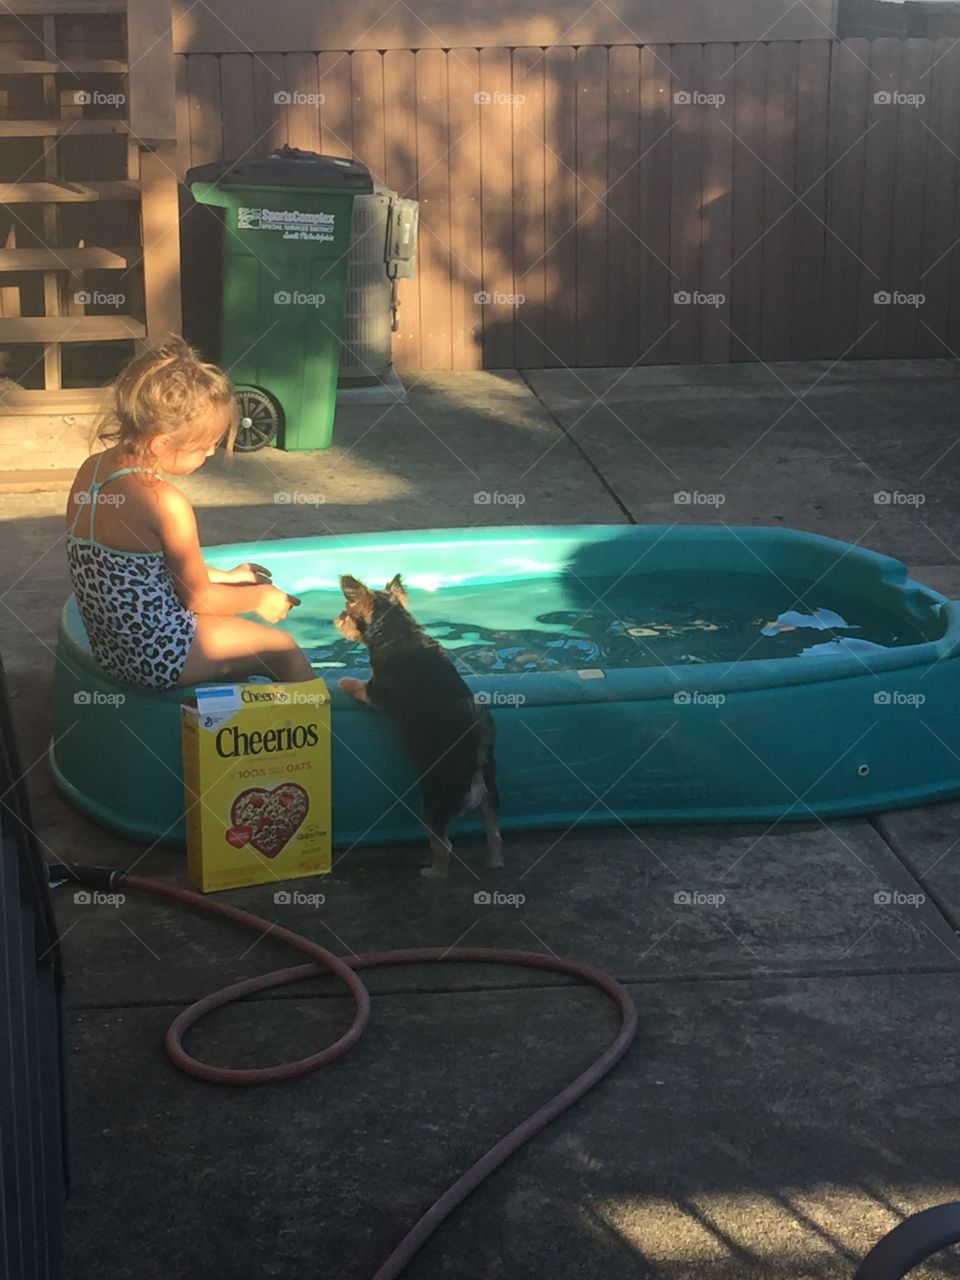 My niece playing in the pool while out dog gidget watch’s her 